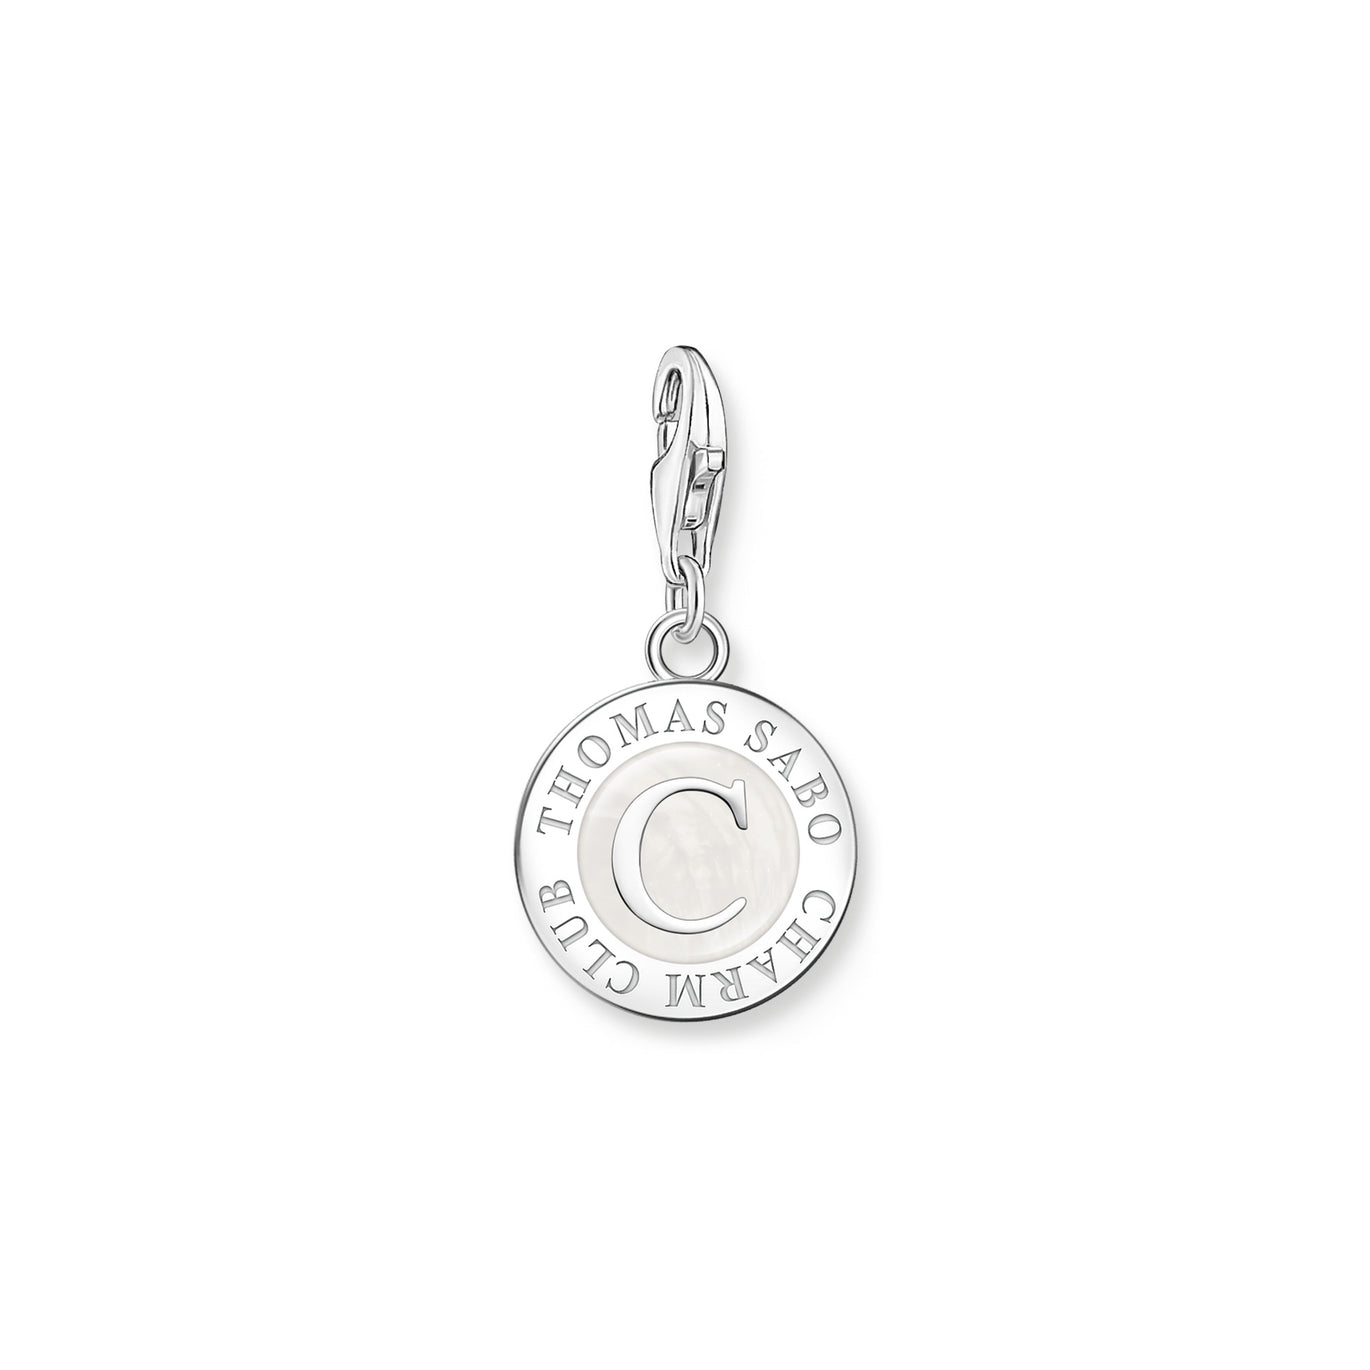 Thomas Sabo Member Silver and White Coin Charm